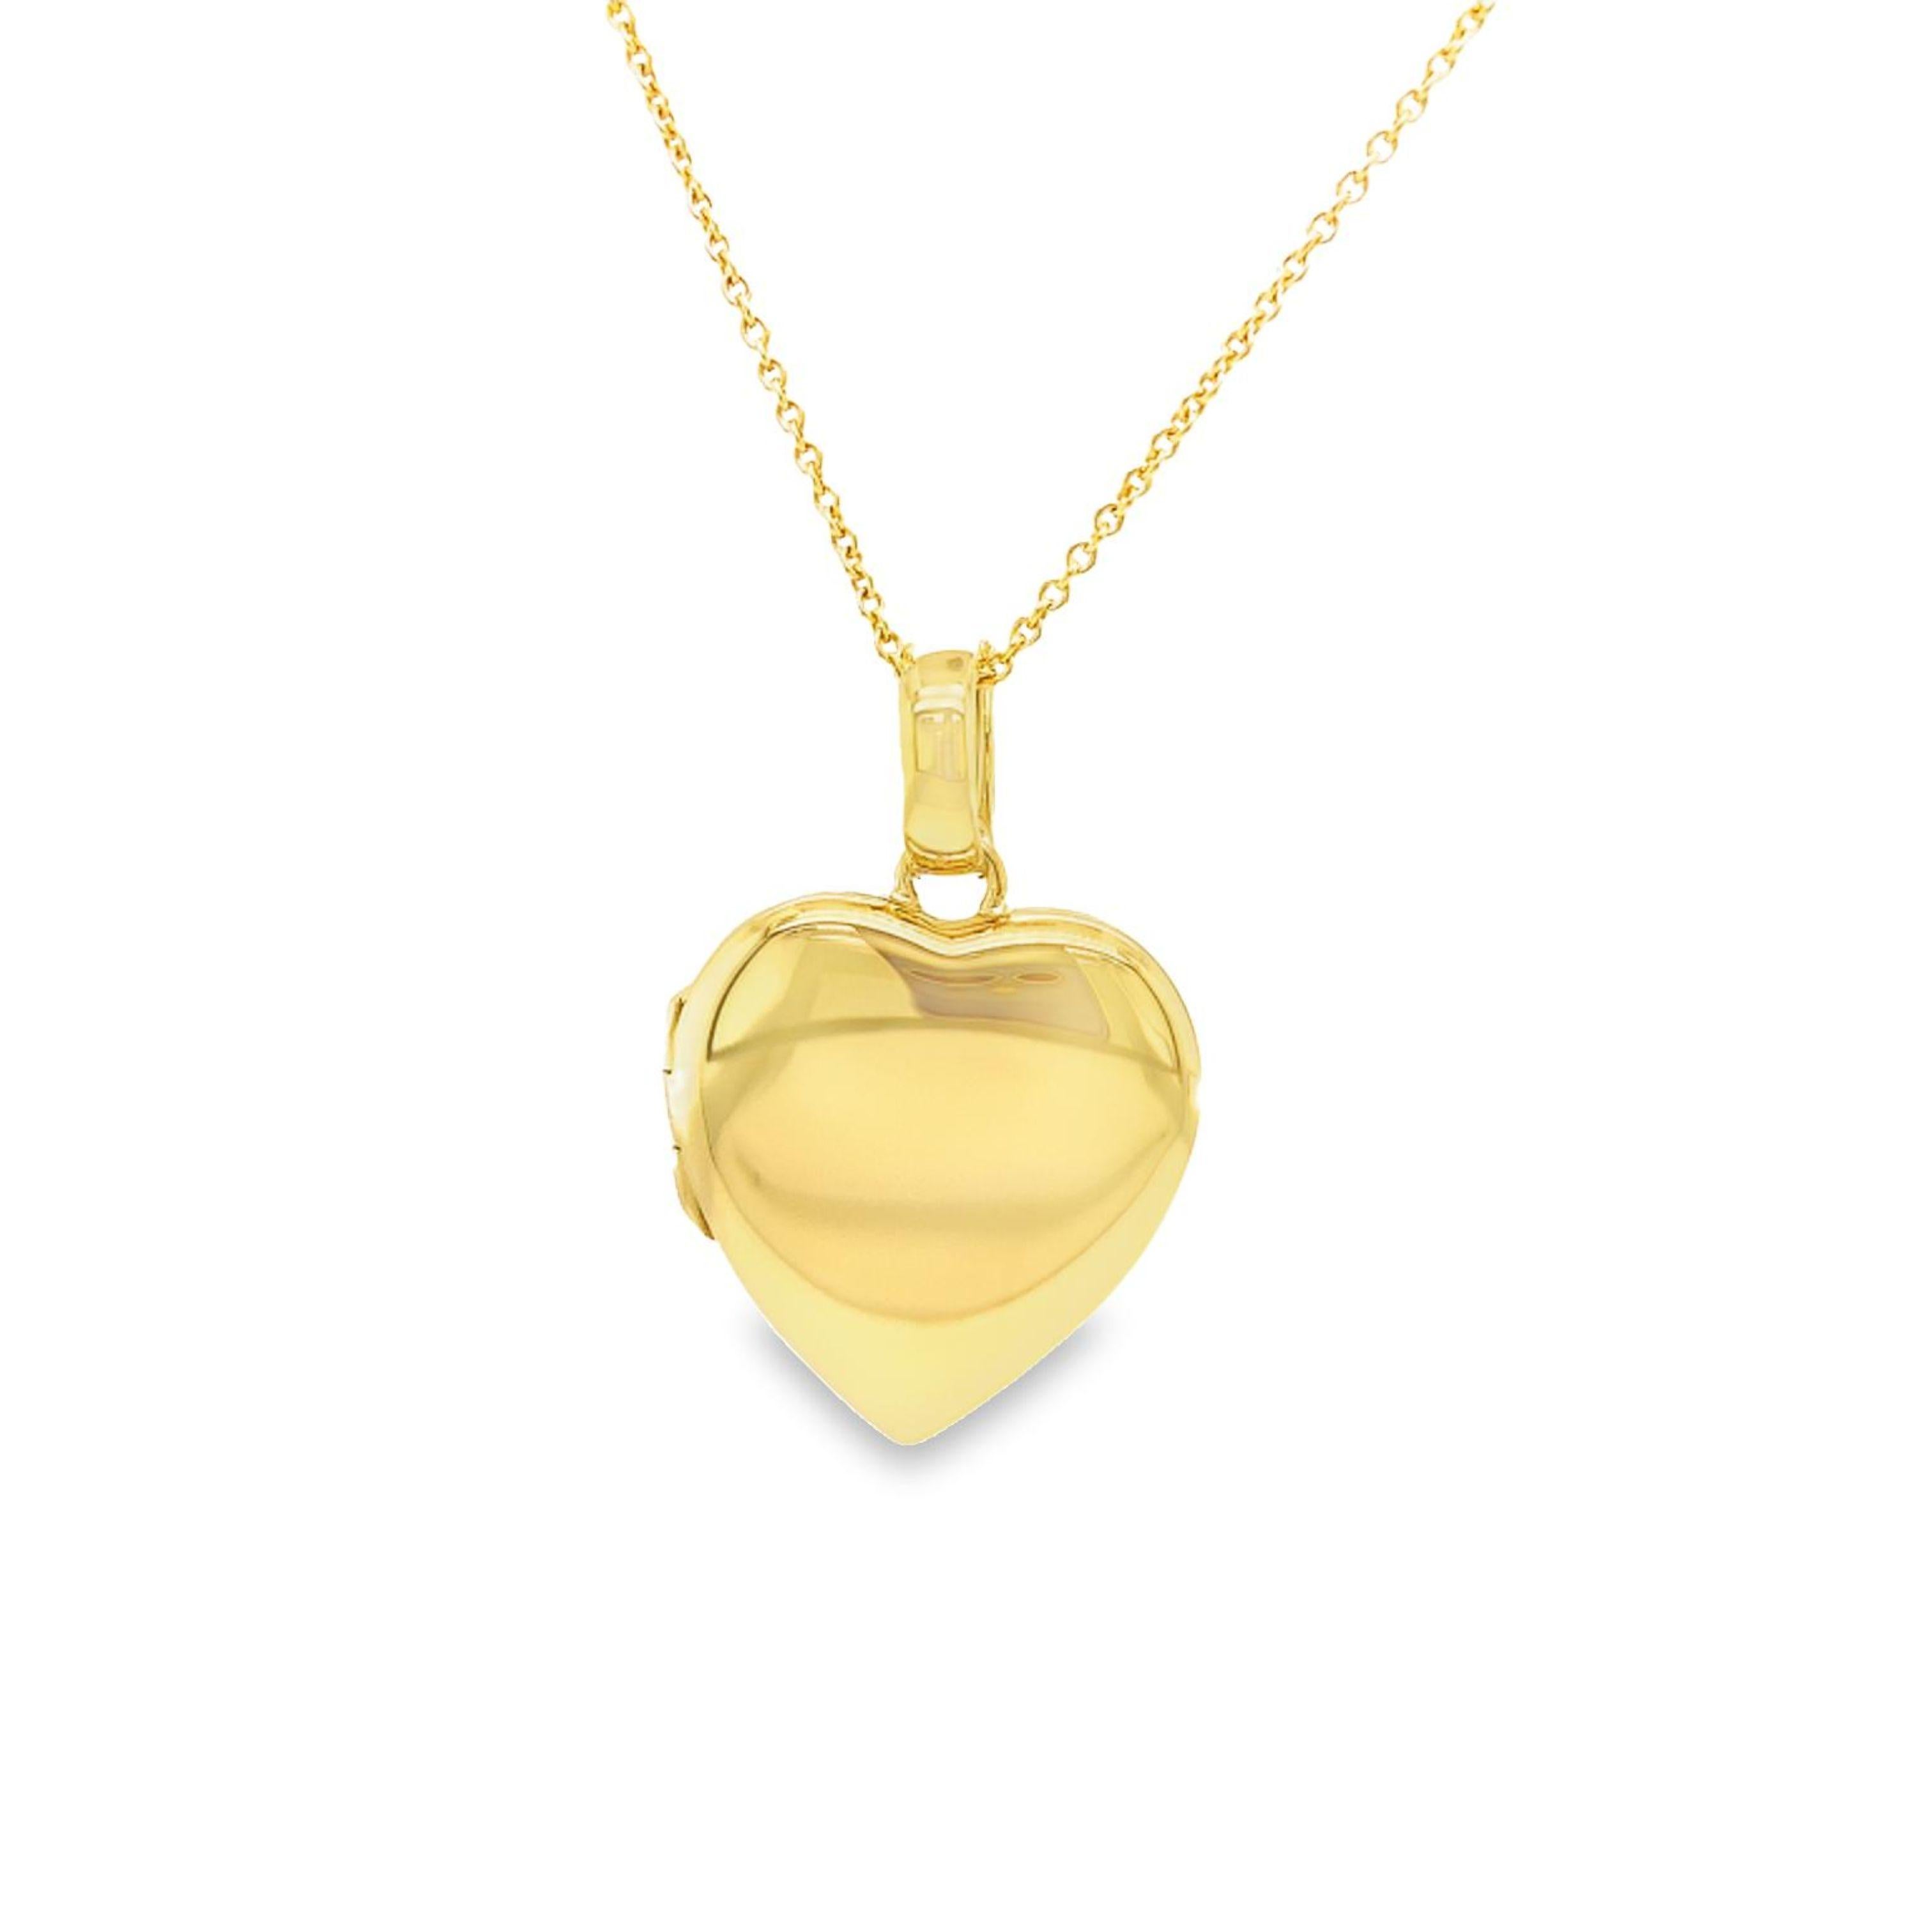 Victor Mayer polished heart shaped locket pendant , 18k yellow gold, Hallmark collection, measurements app. 23.0 mm x 25.0 mm

About the creator Victor Mayer
Victor Mayer is internationally renowned for elegant timeless designs and unrivalled